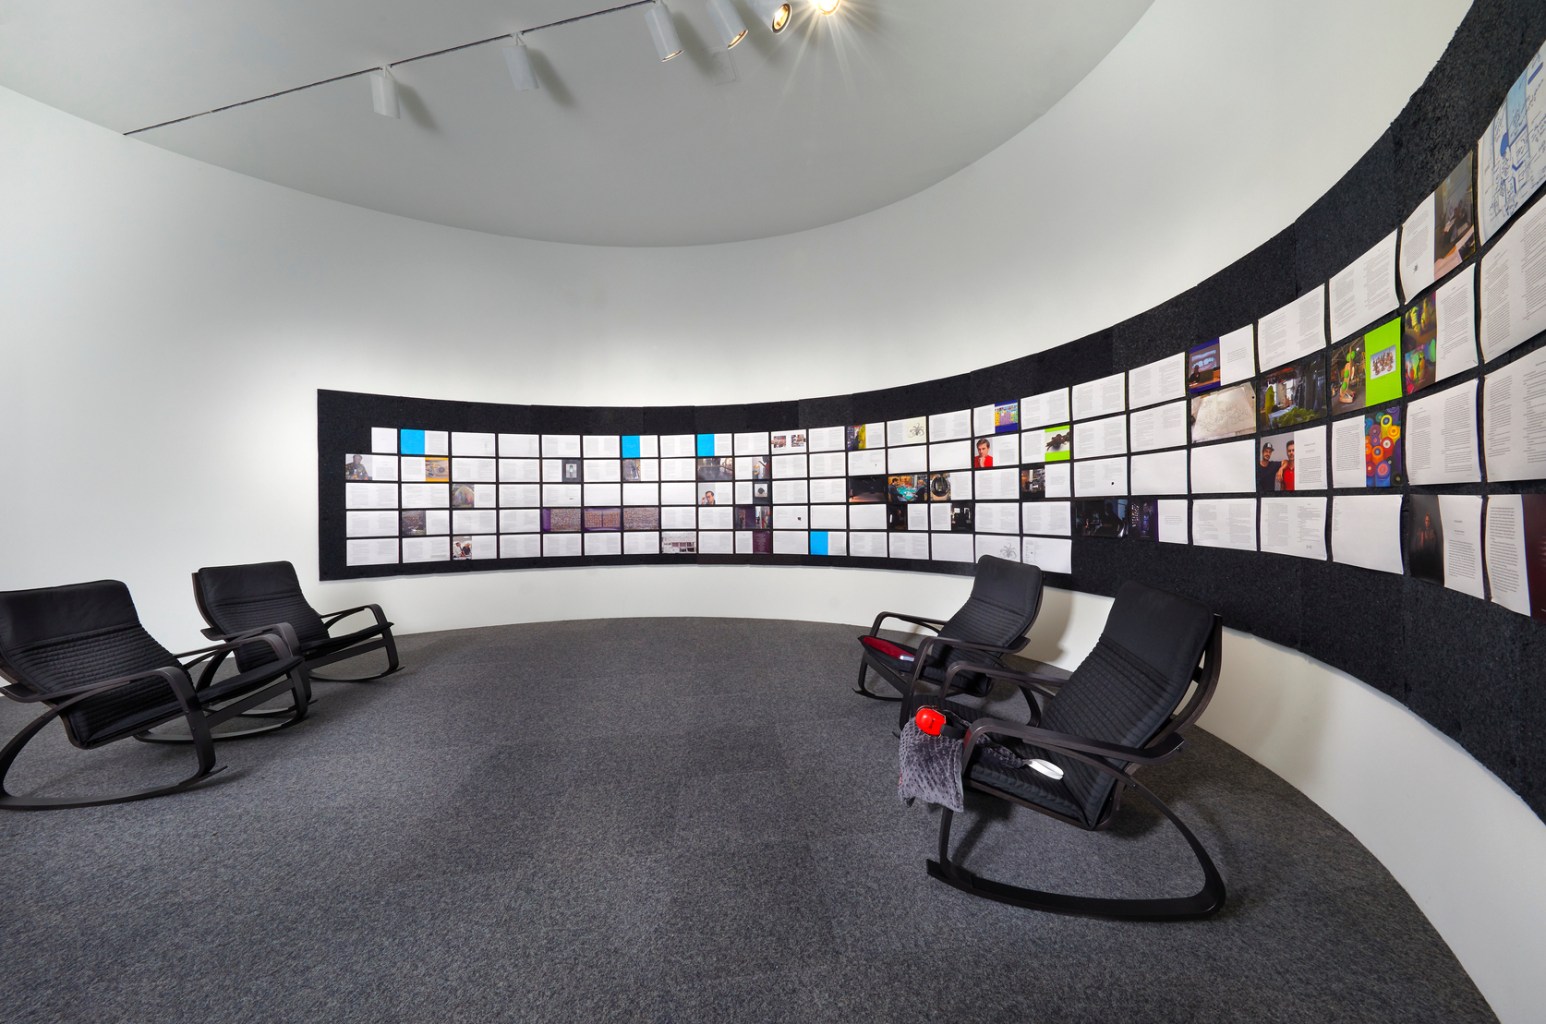 In a room with curved walls, rocking chairs are arranged in front of a grid of images.